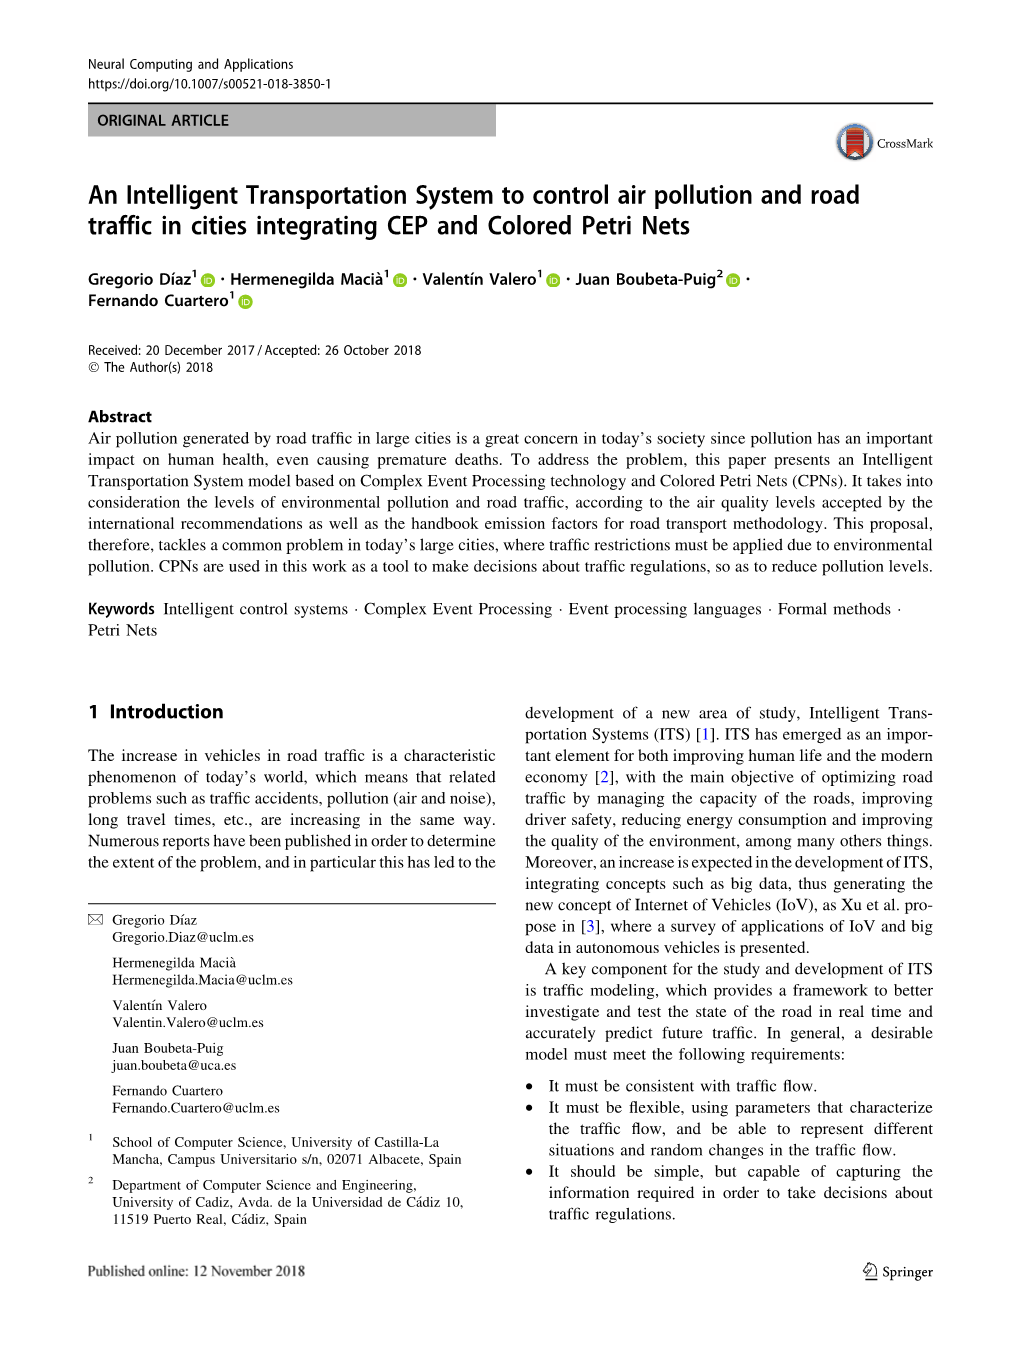 An Intelligent Transportation System to Control Air Pollution and Road Traffic in Cities Integrating CEP and Colored Petri Nets